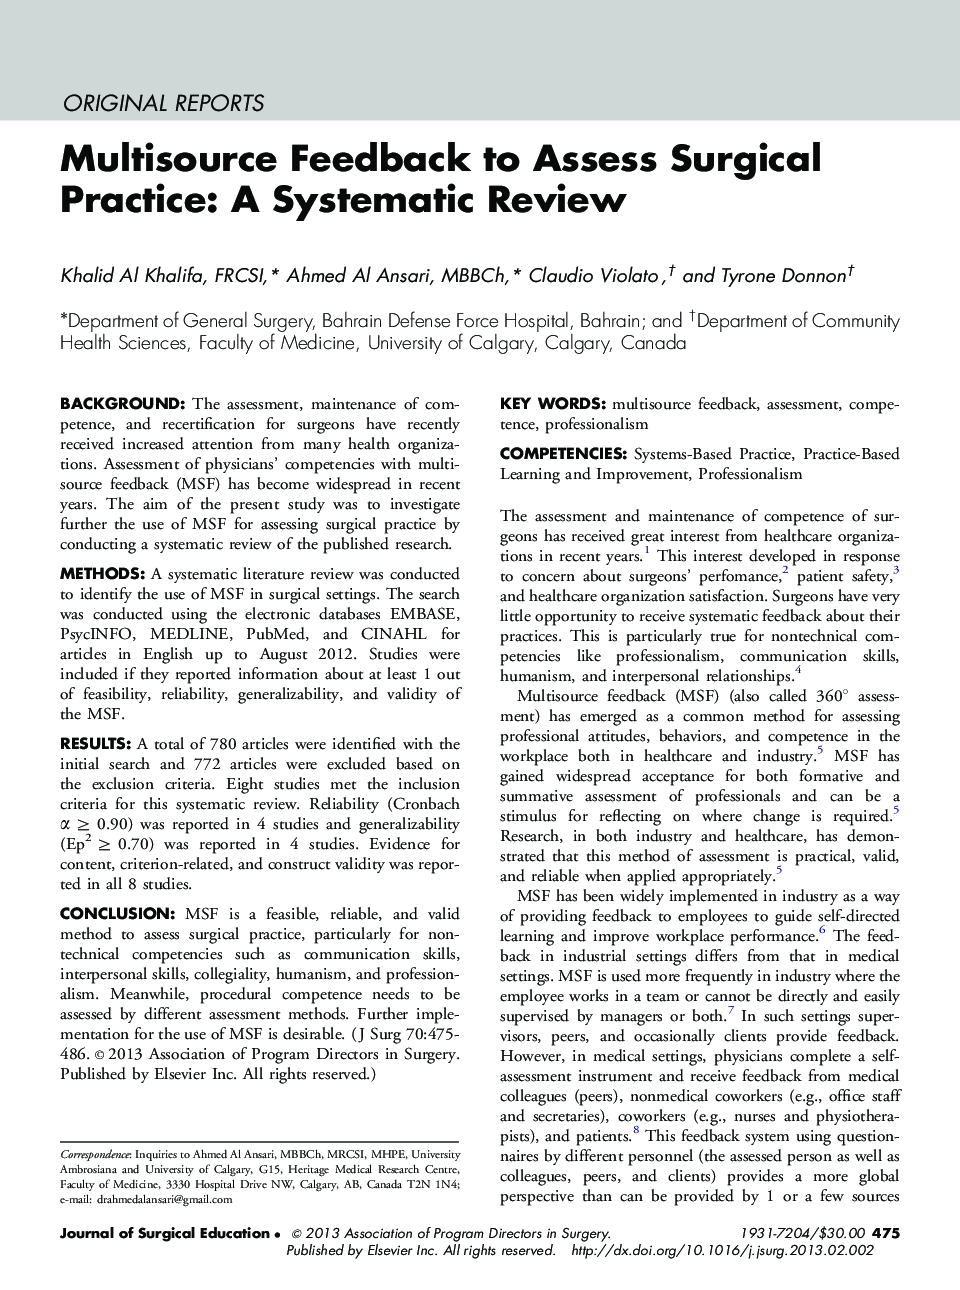 Multisource Feedback to Assess Surgical Practice: A Systematic Review